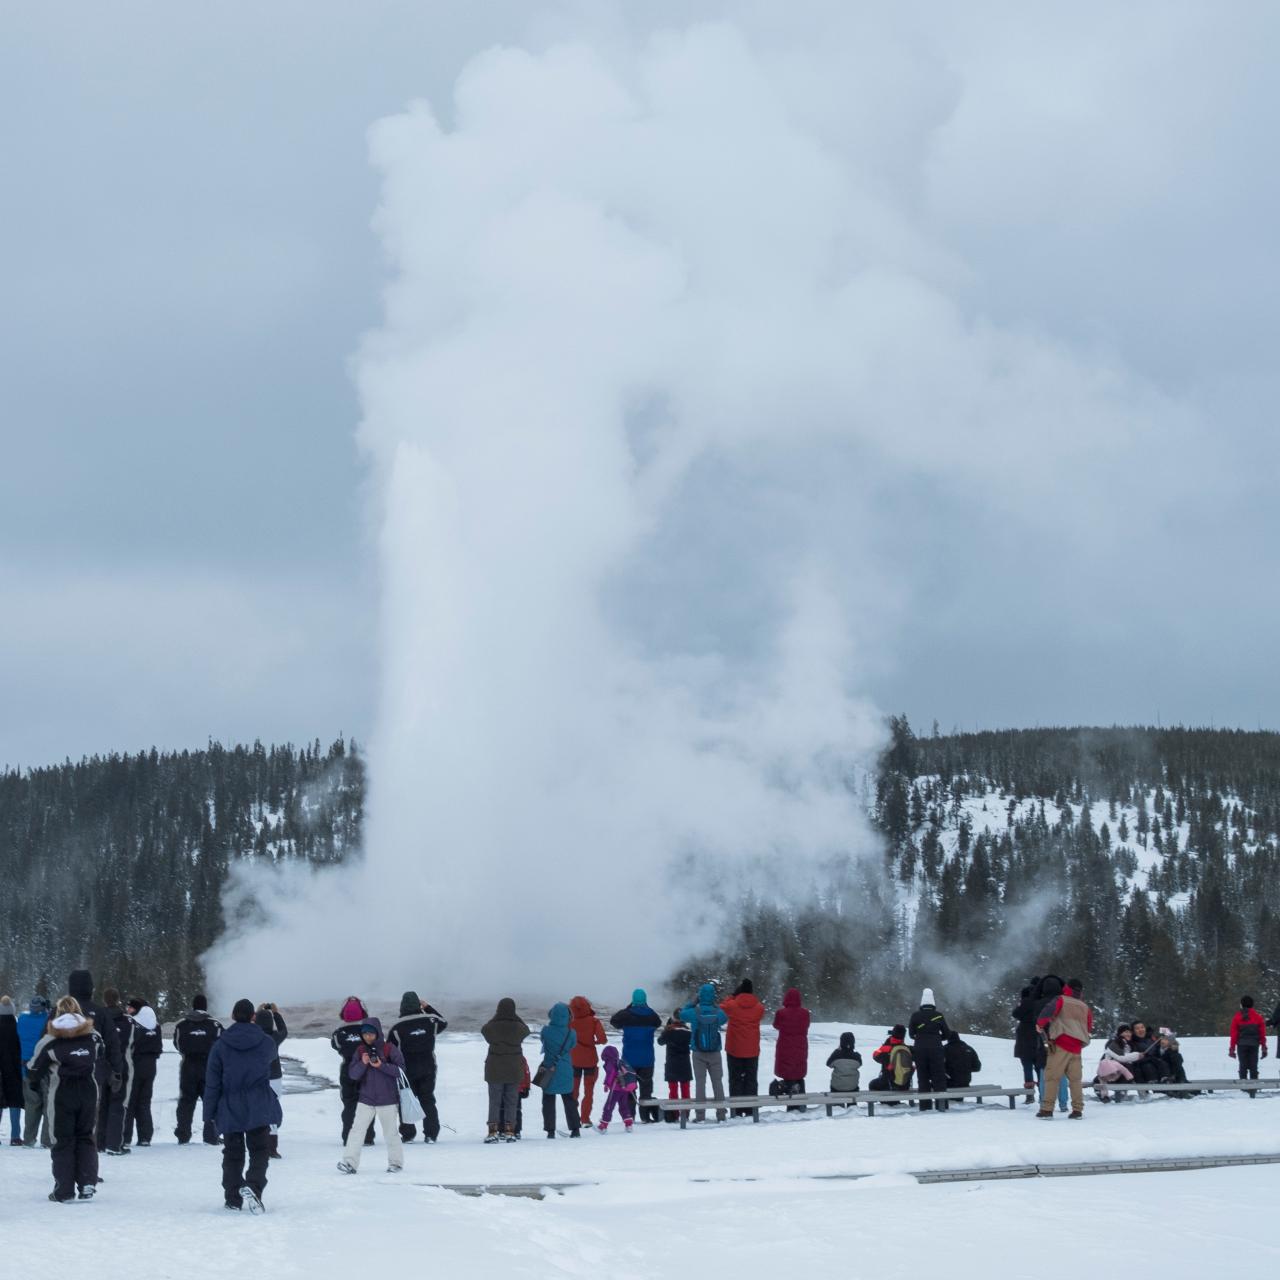 Why You Should Book a Winter Trip to Yellowstone National Park